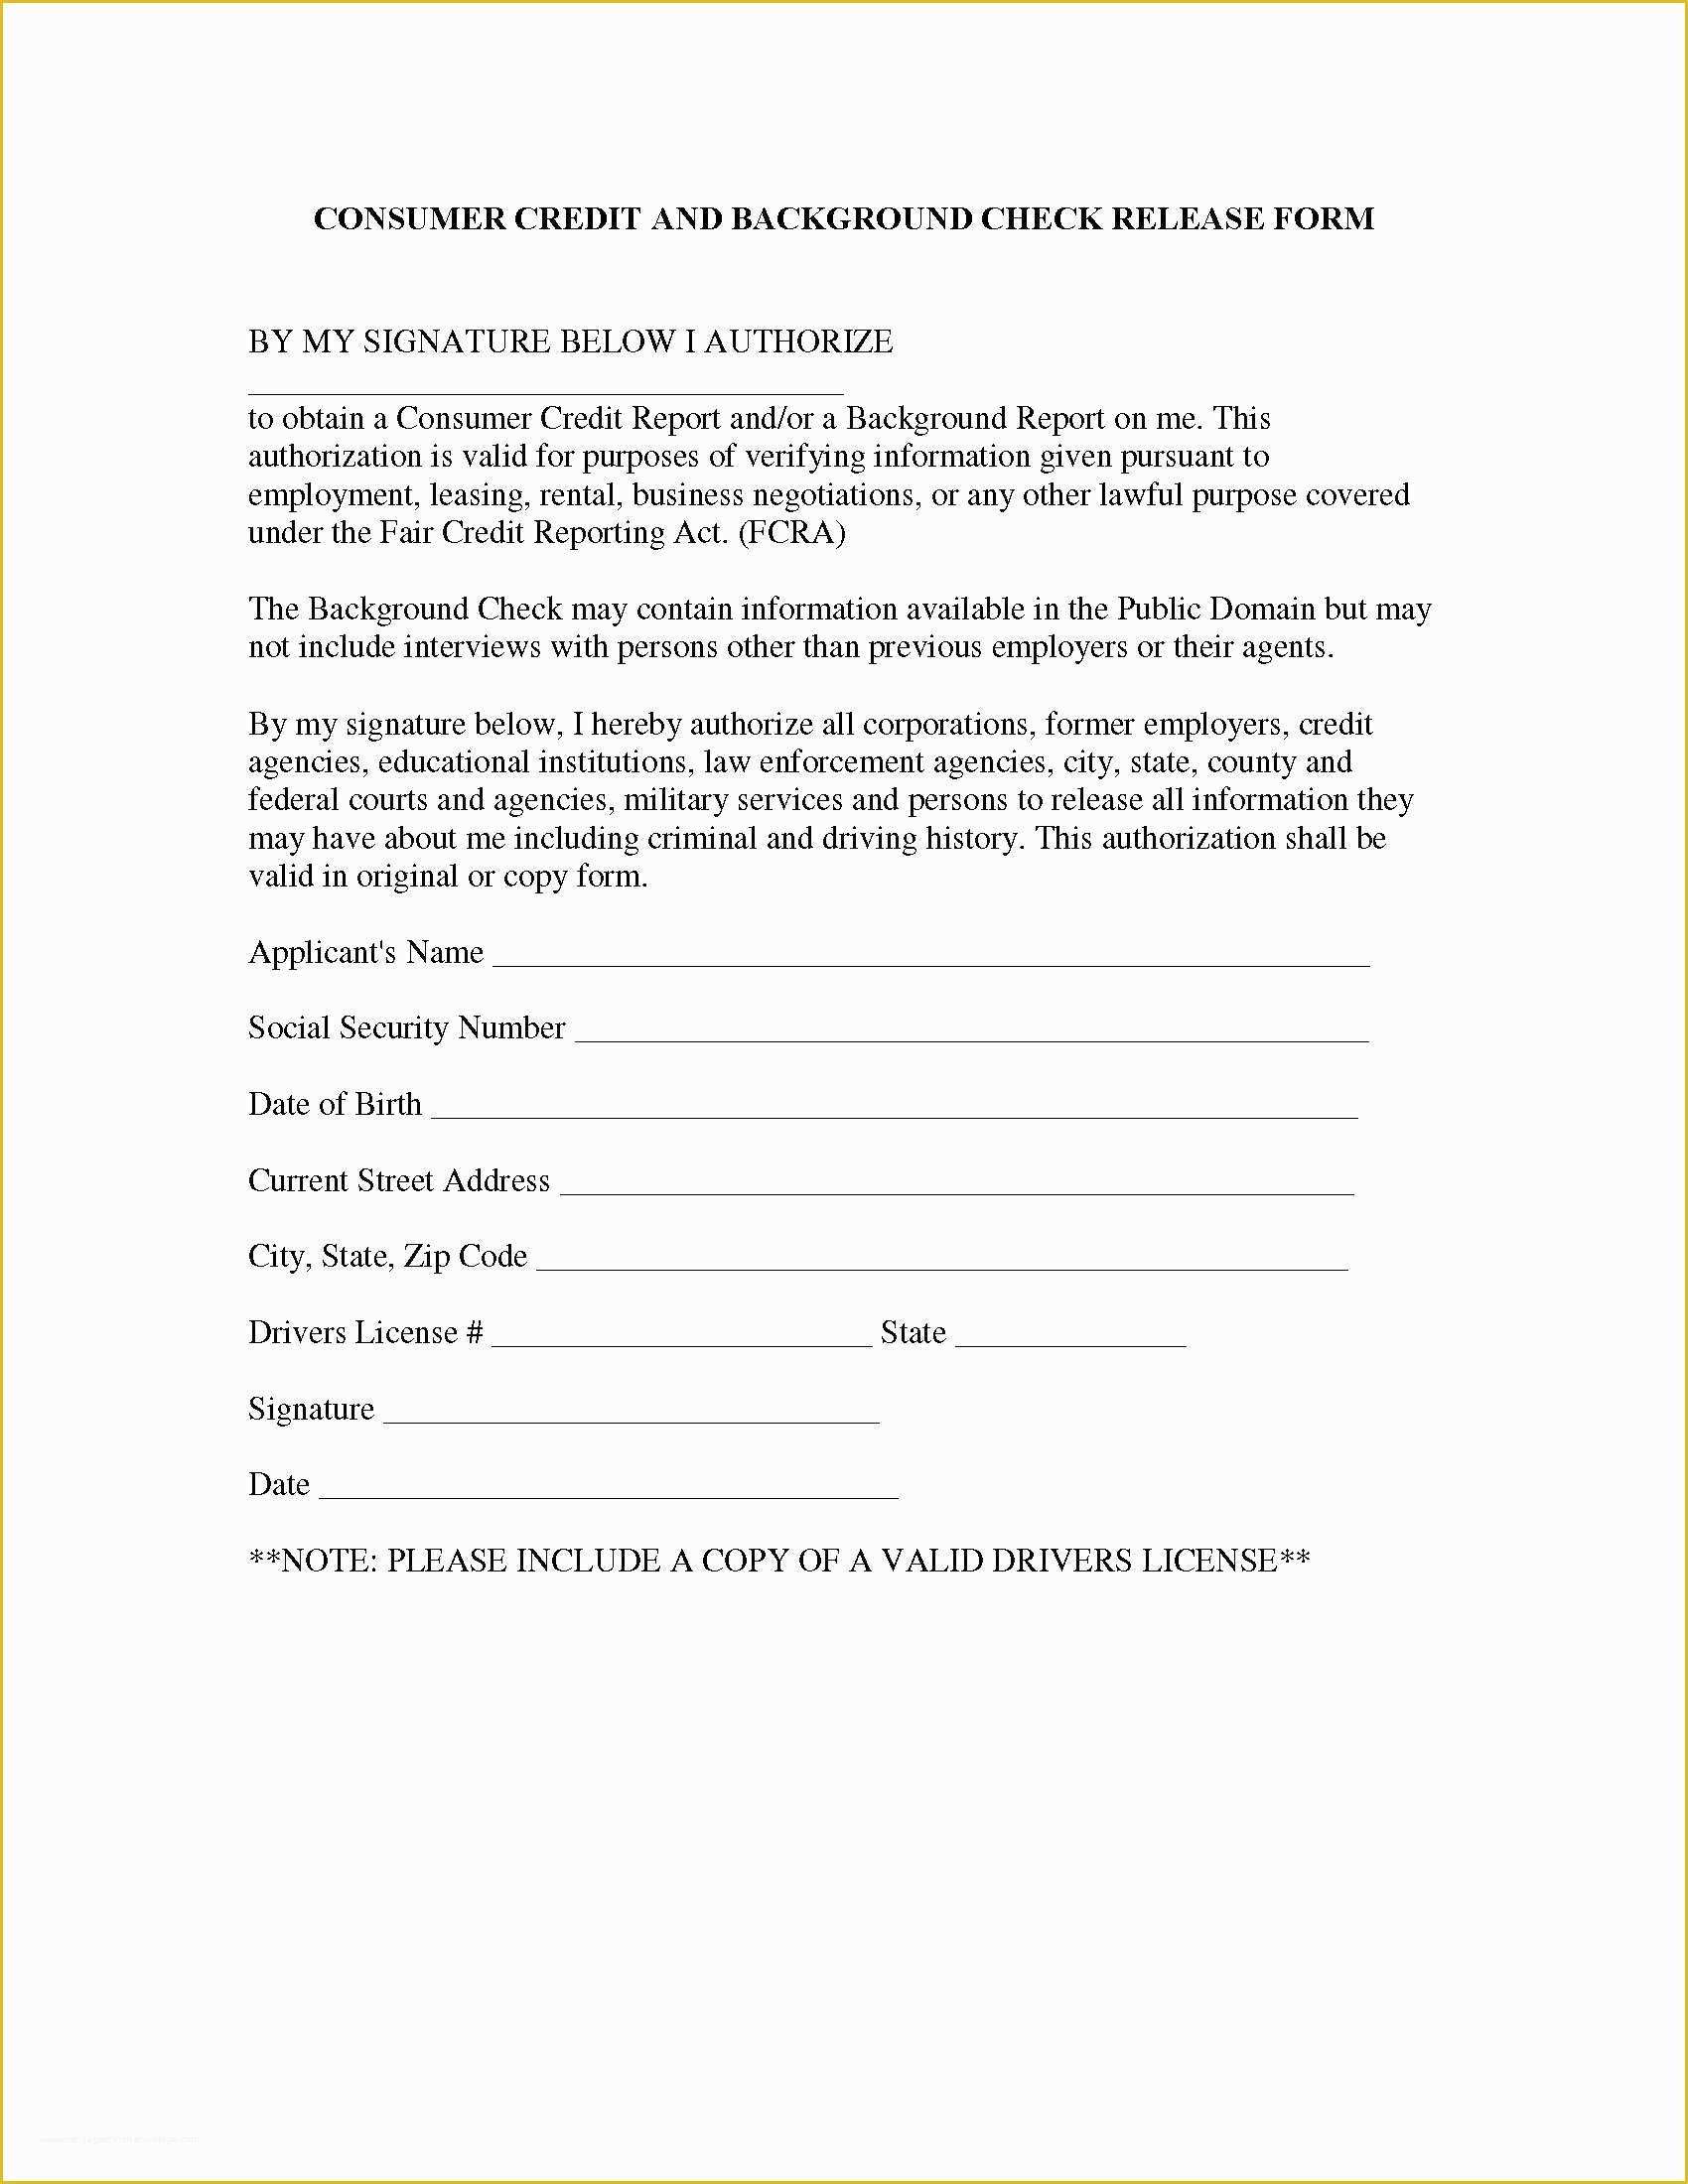 Background Check form Template Free Of Consumer Credit and Background Check Release form